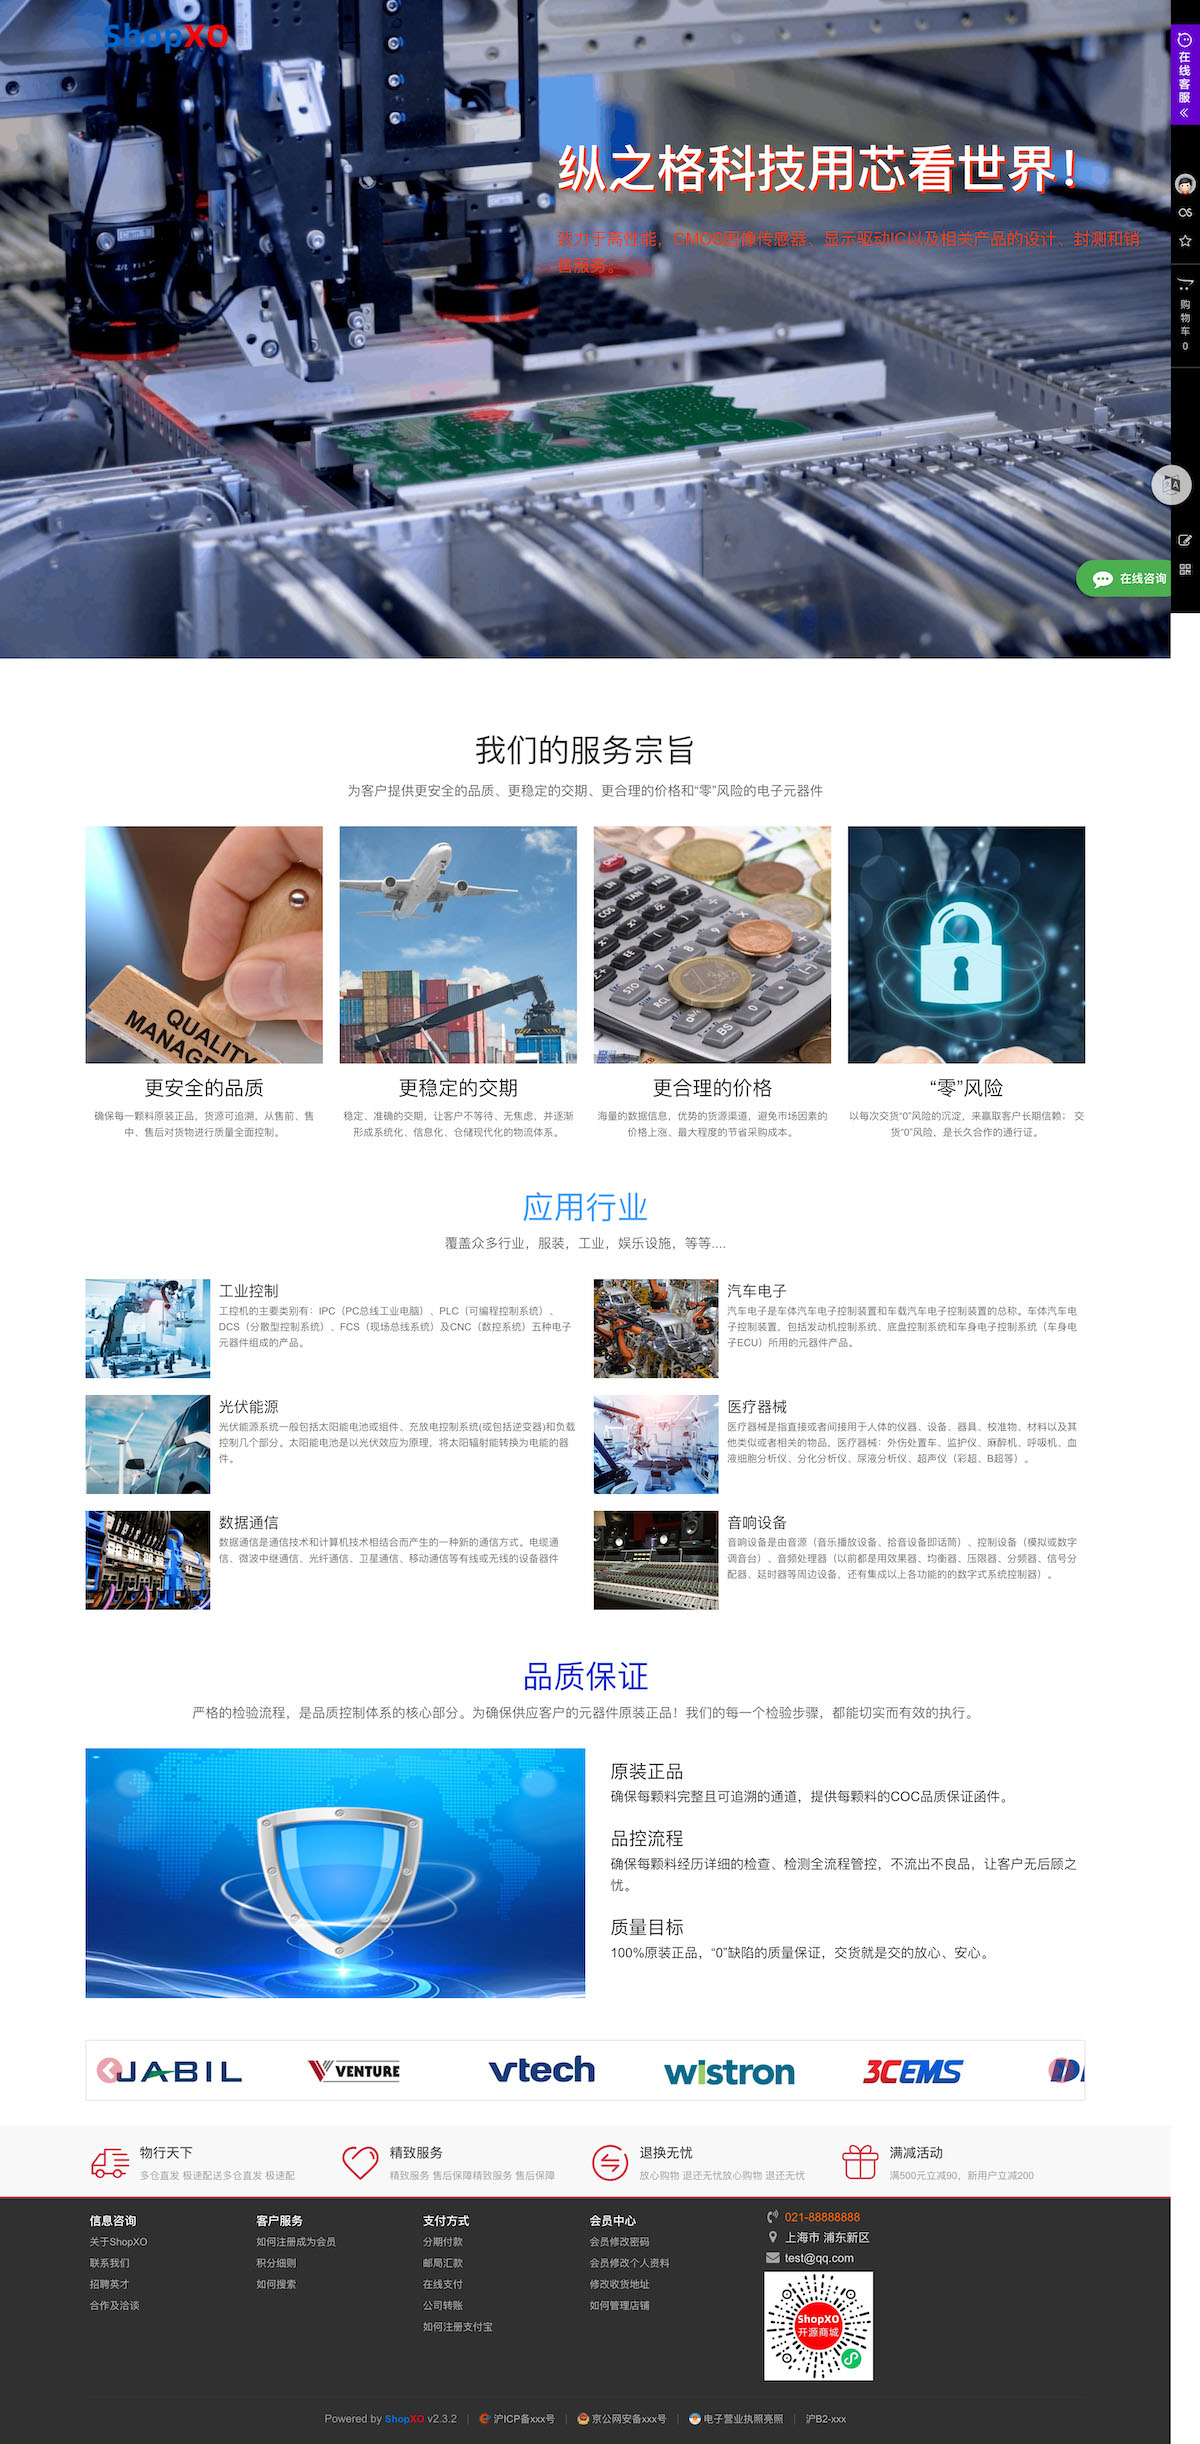 Demo picture of electronic component enterprise official website.jpg